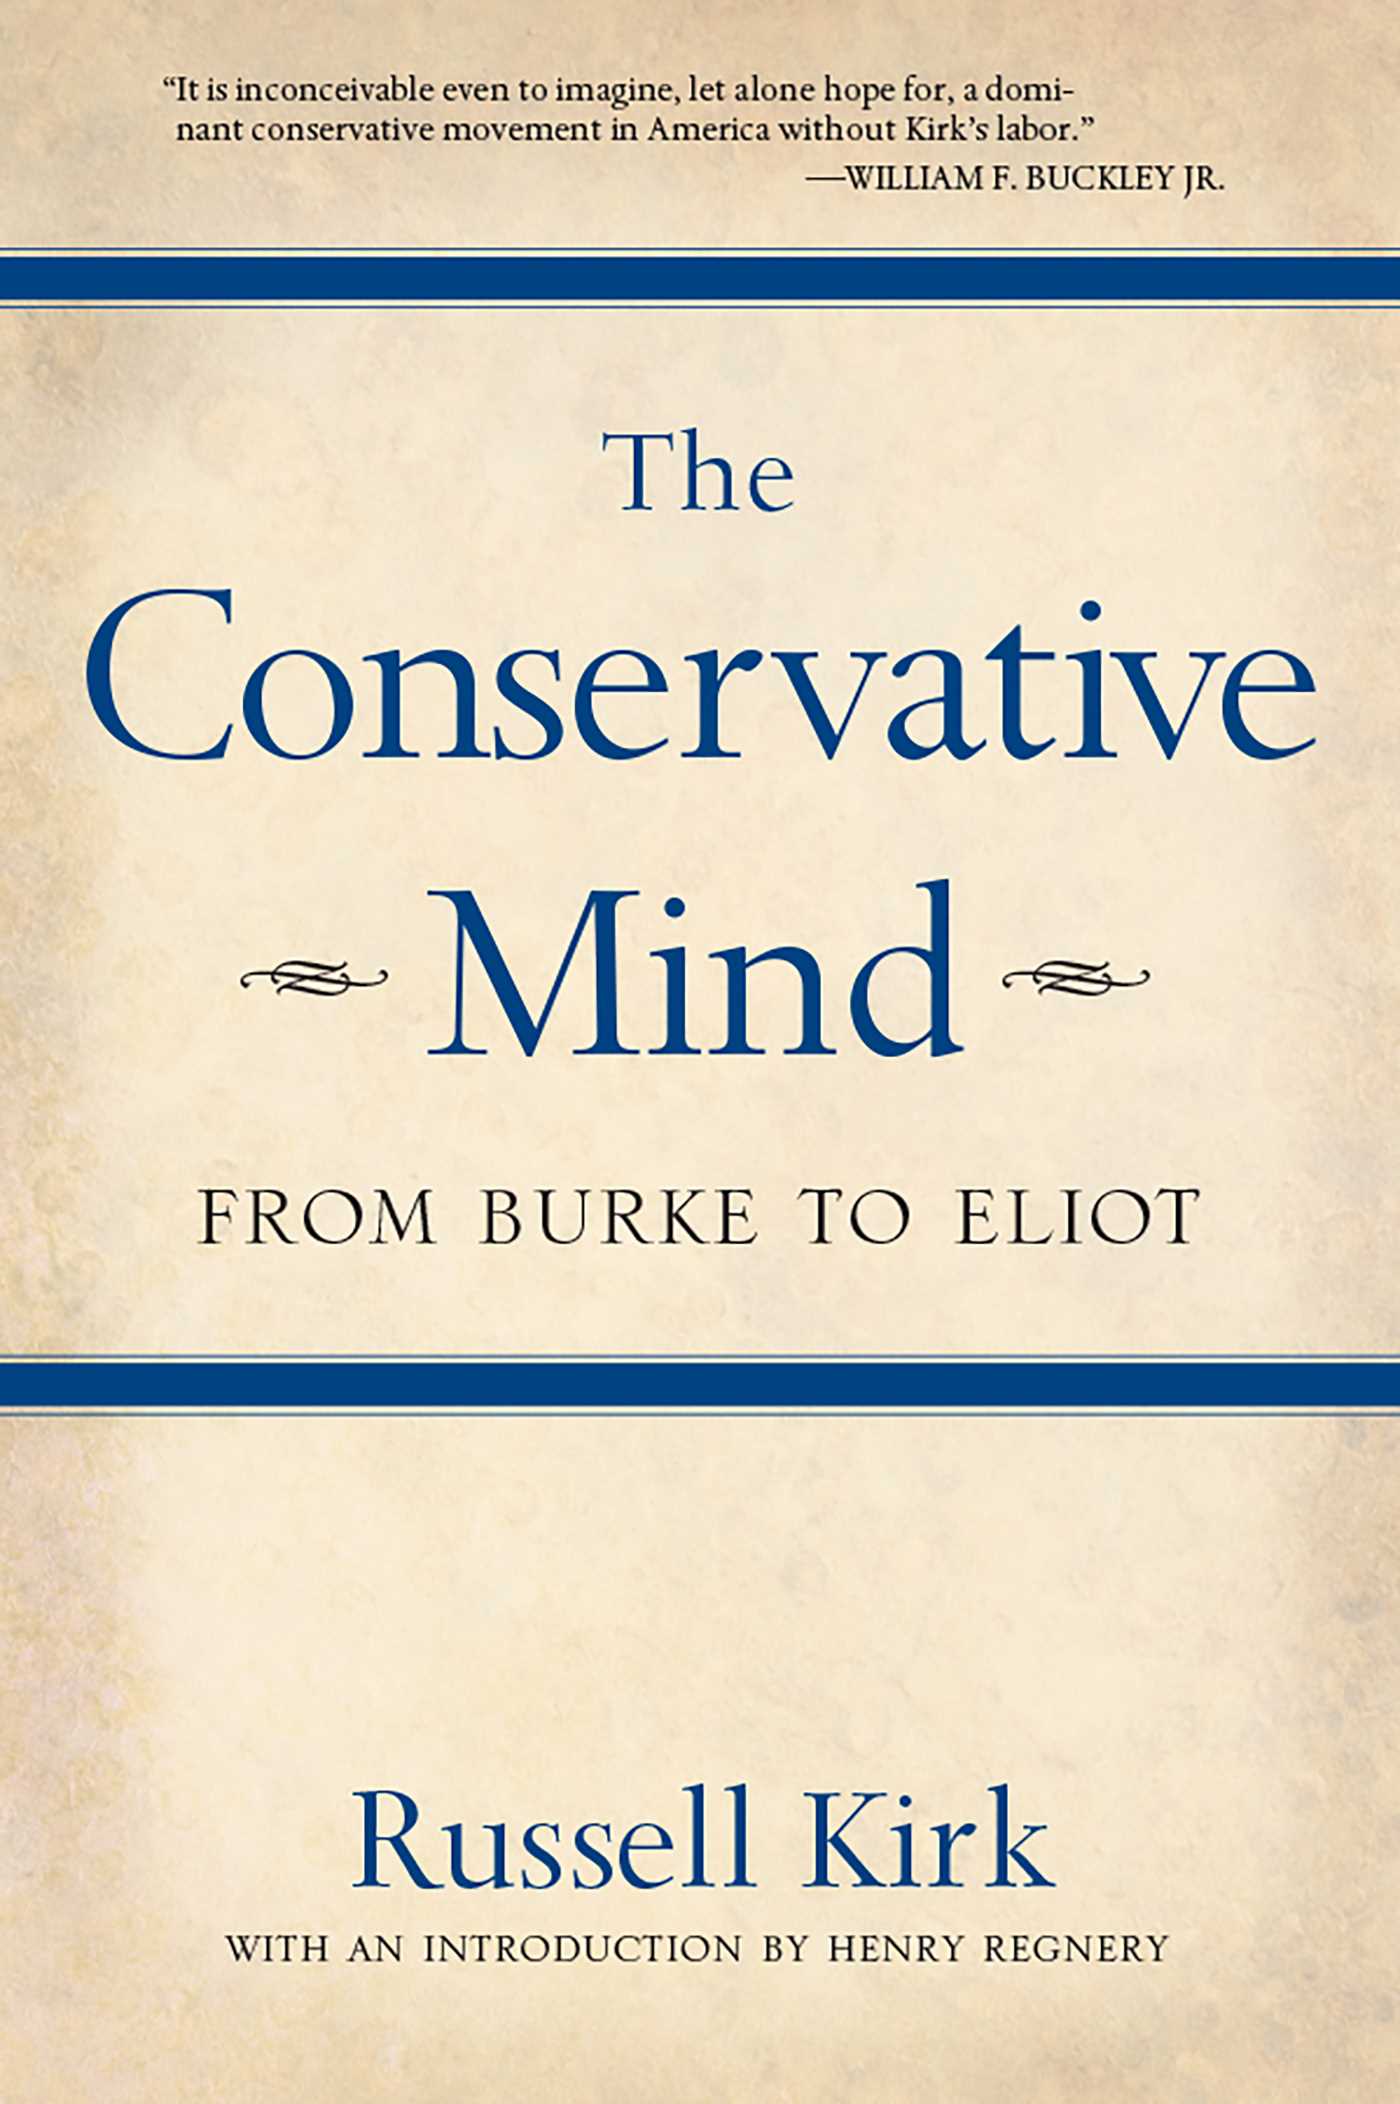 The Conservative Mind by Kirk, Russell (ebook)